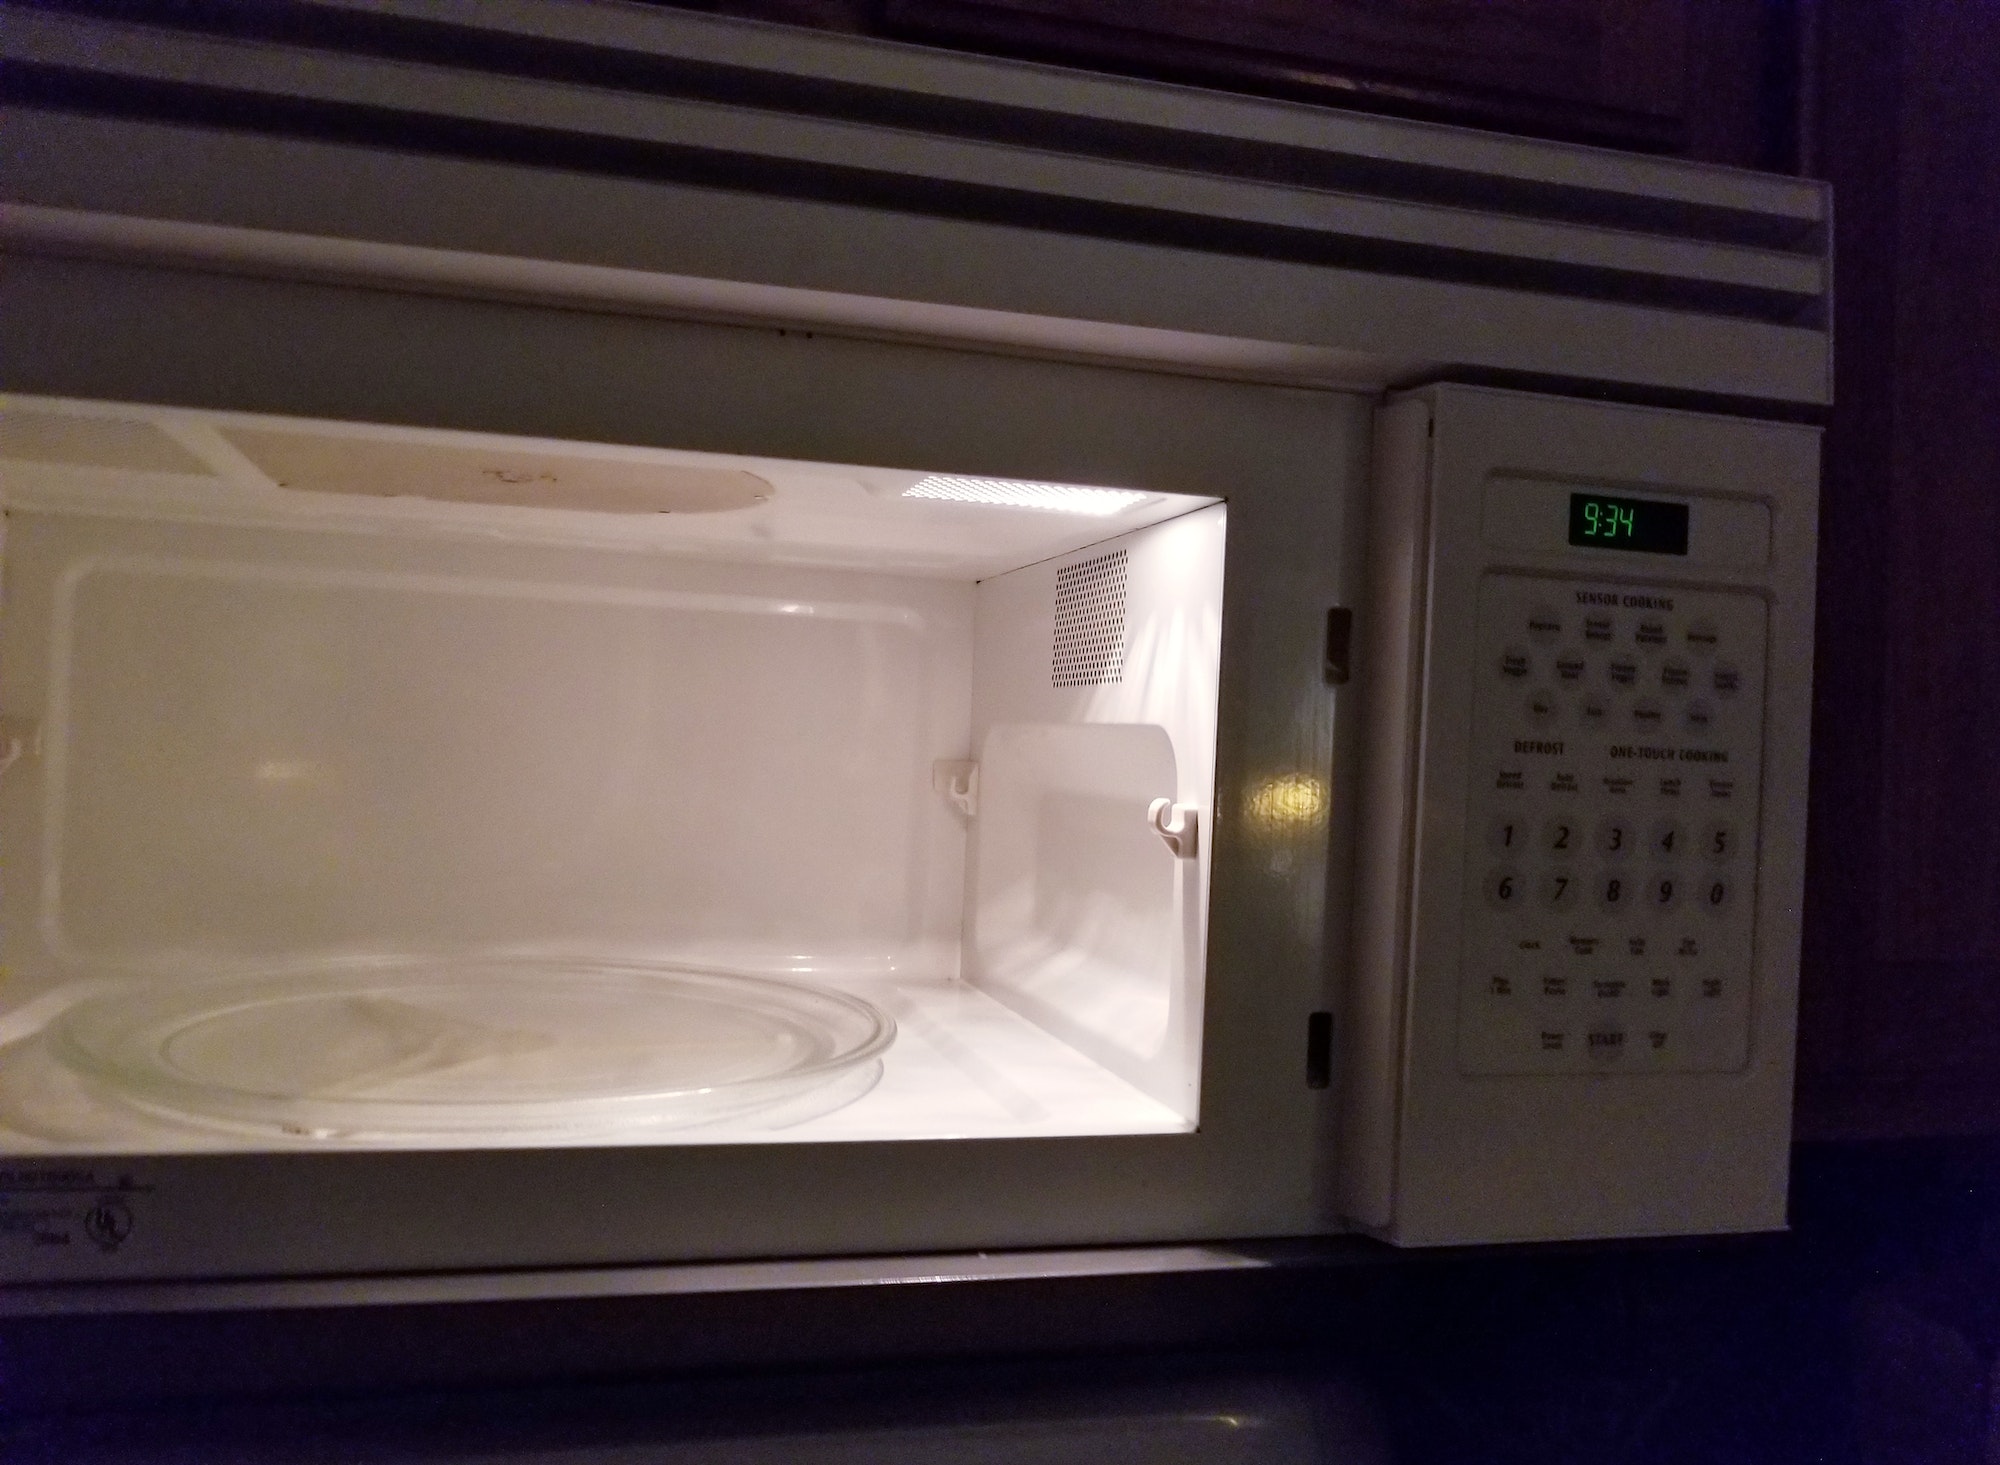 Microwave! Built in Microwave Oven!